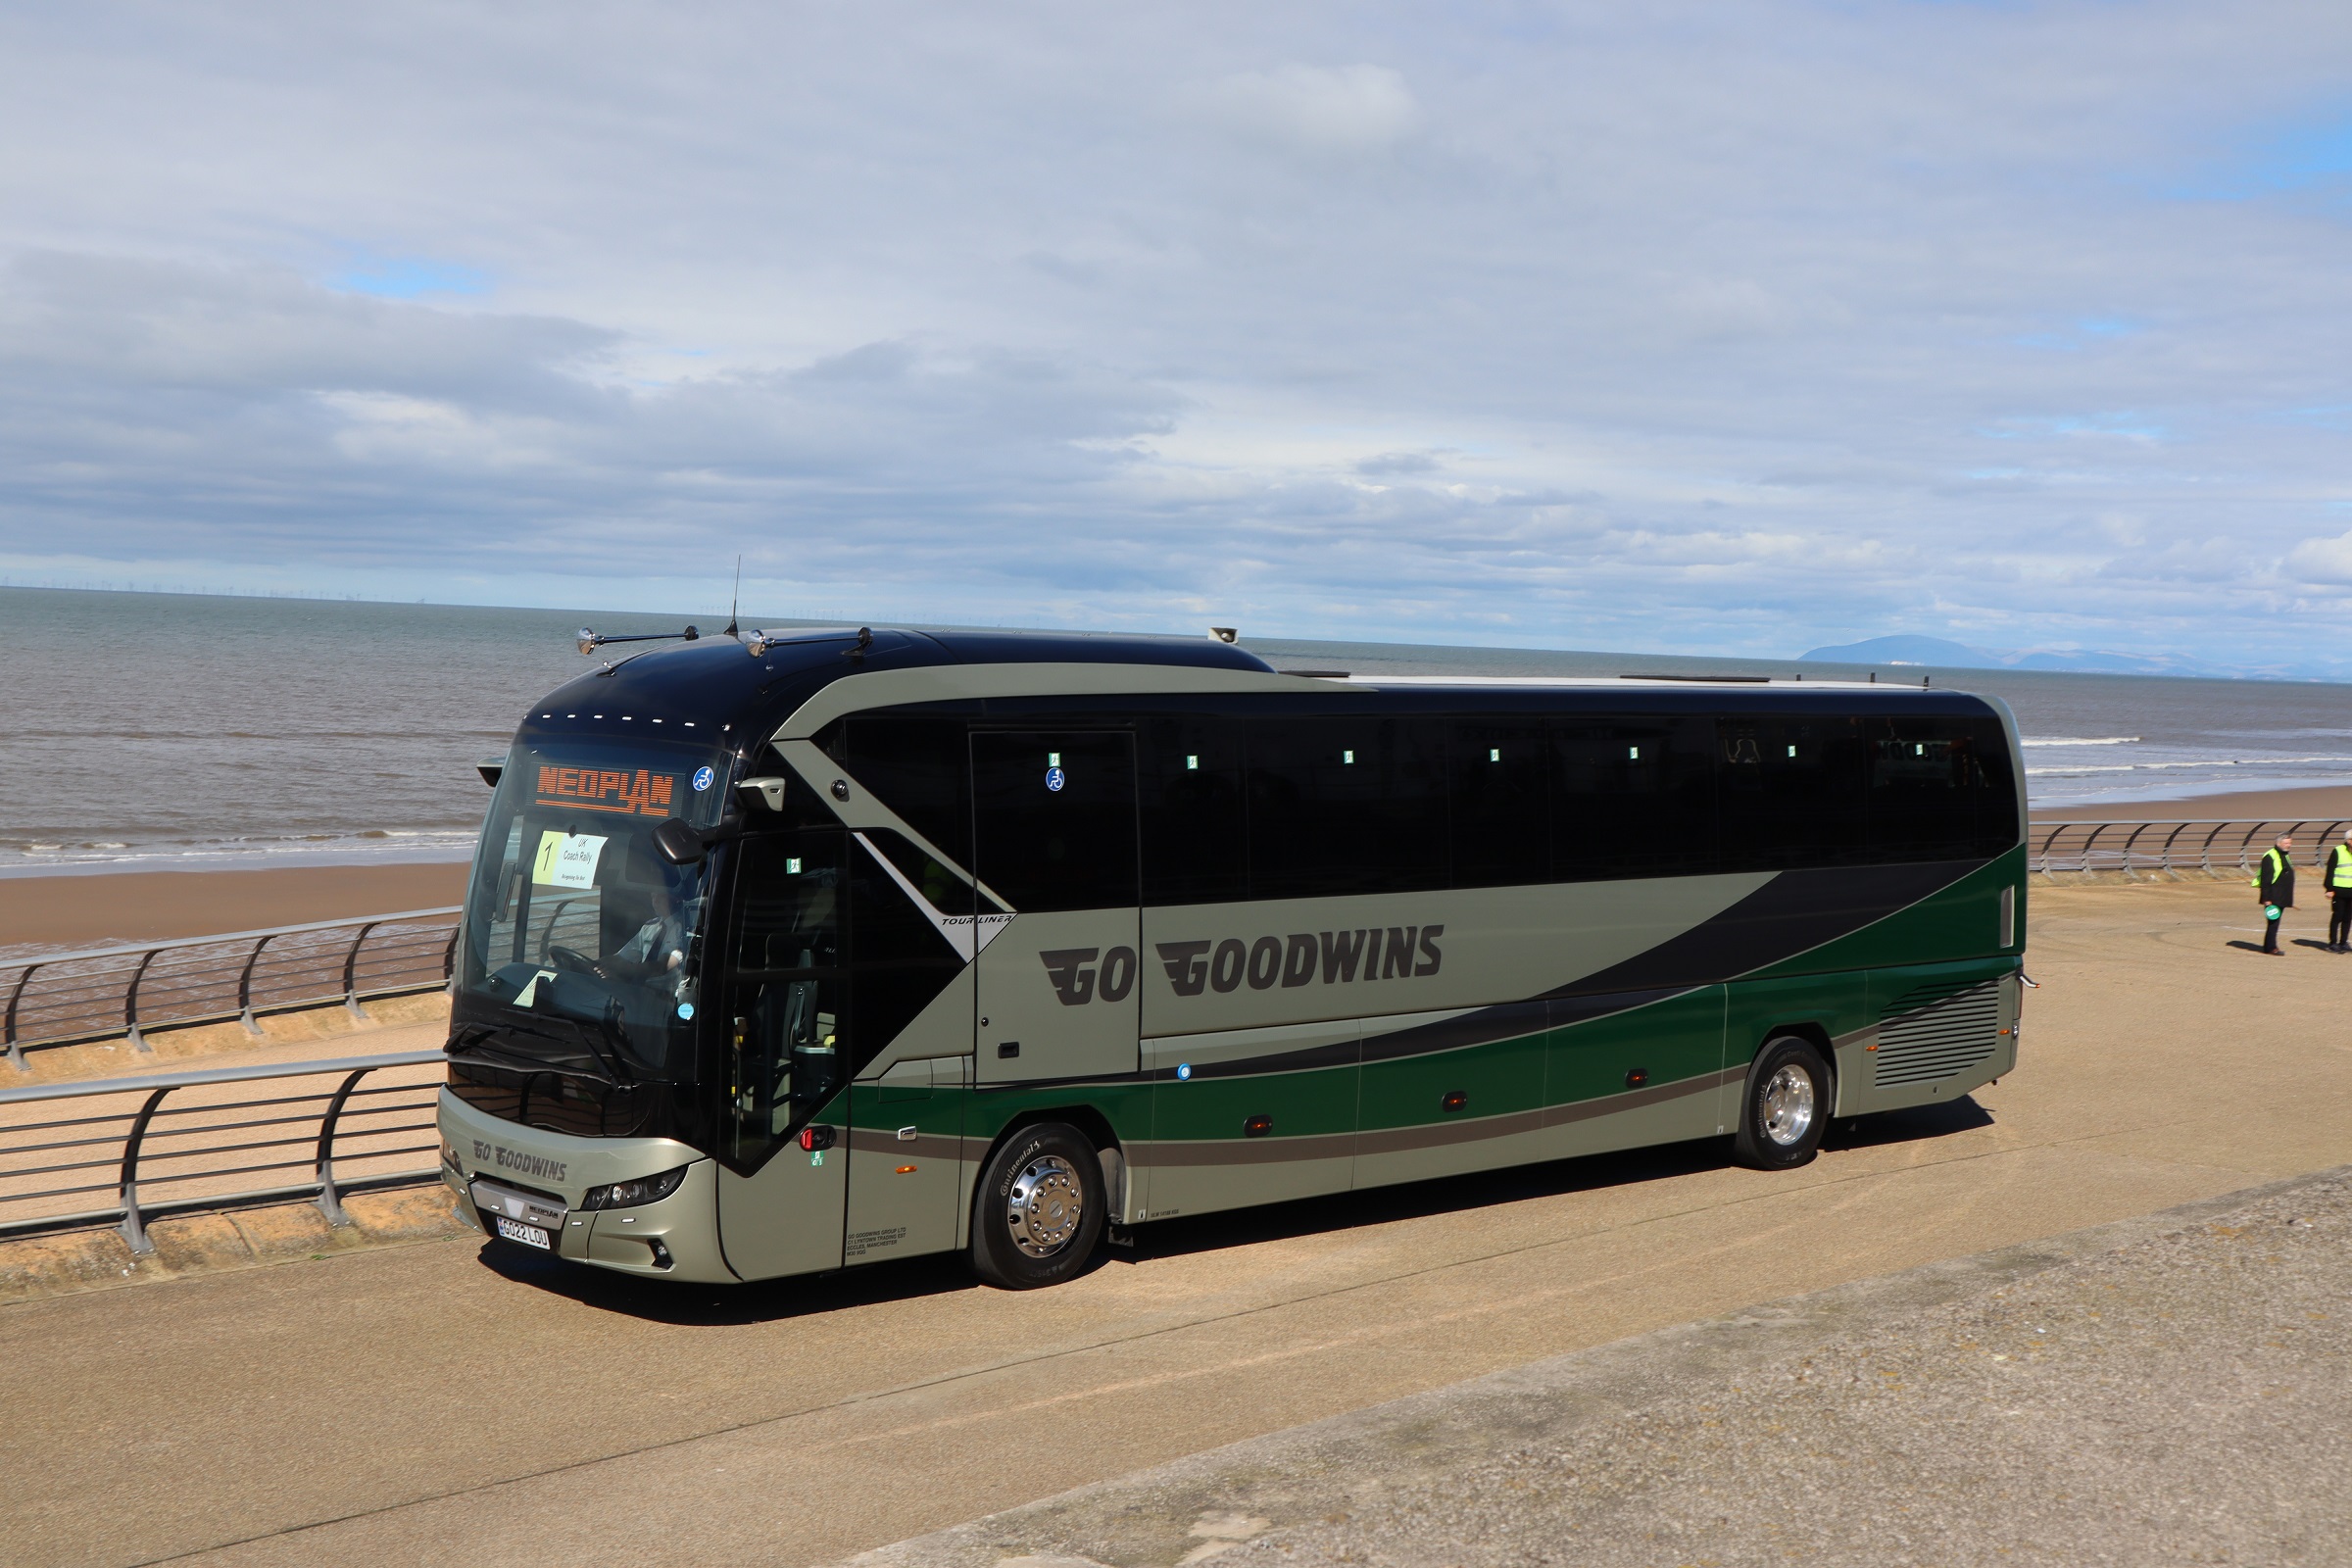 Go Goodwins Neoplan Tourliner with MAN OptiView cameras